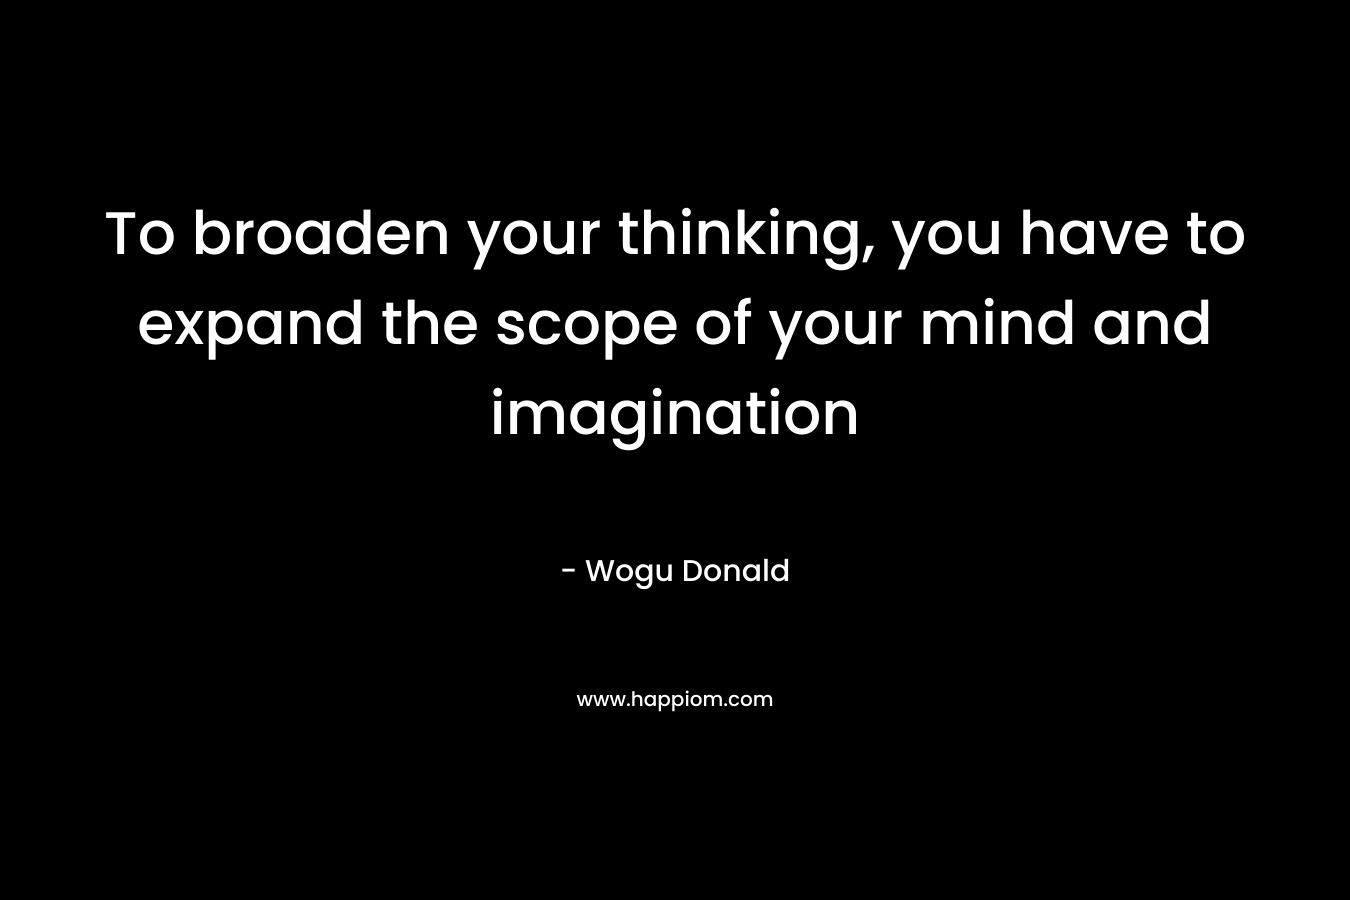 To broaden your thinking, you have to expand the scope of your mind and imagination – Wogu Donald